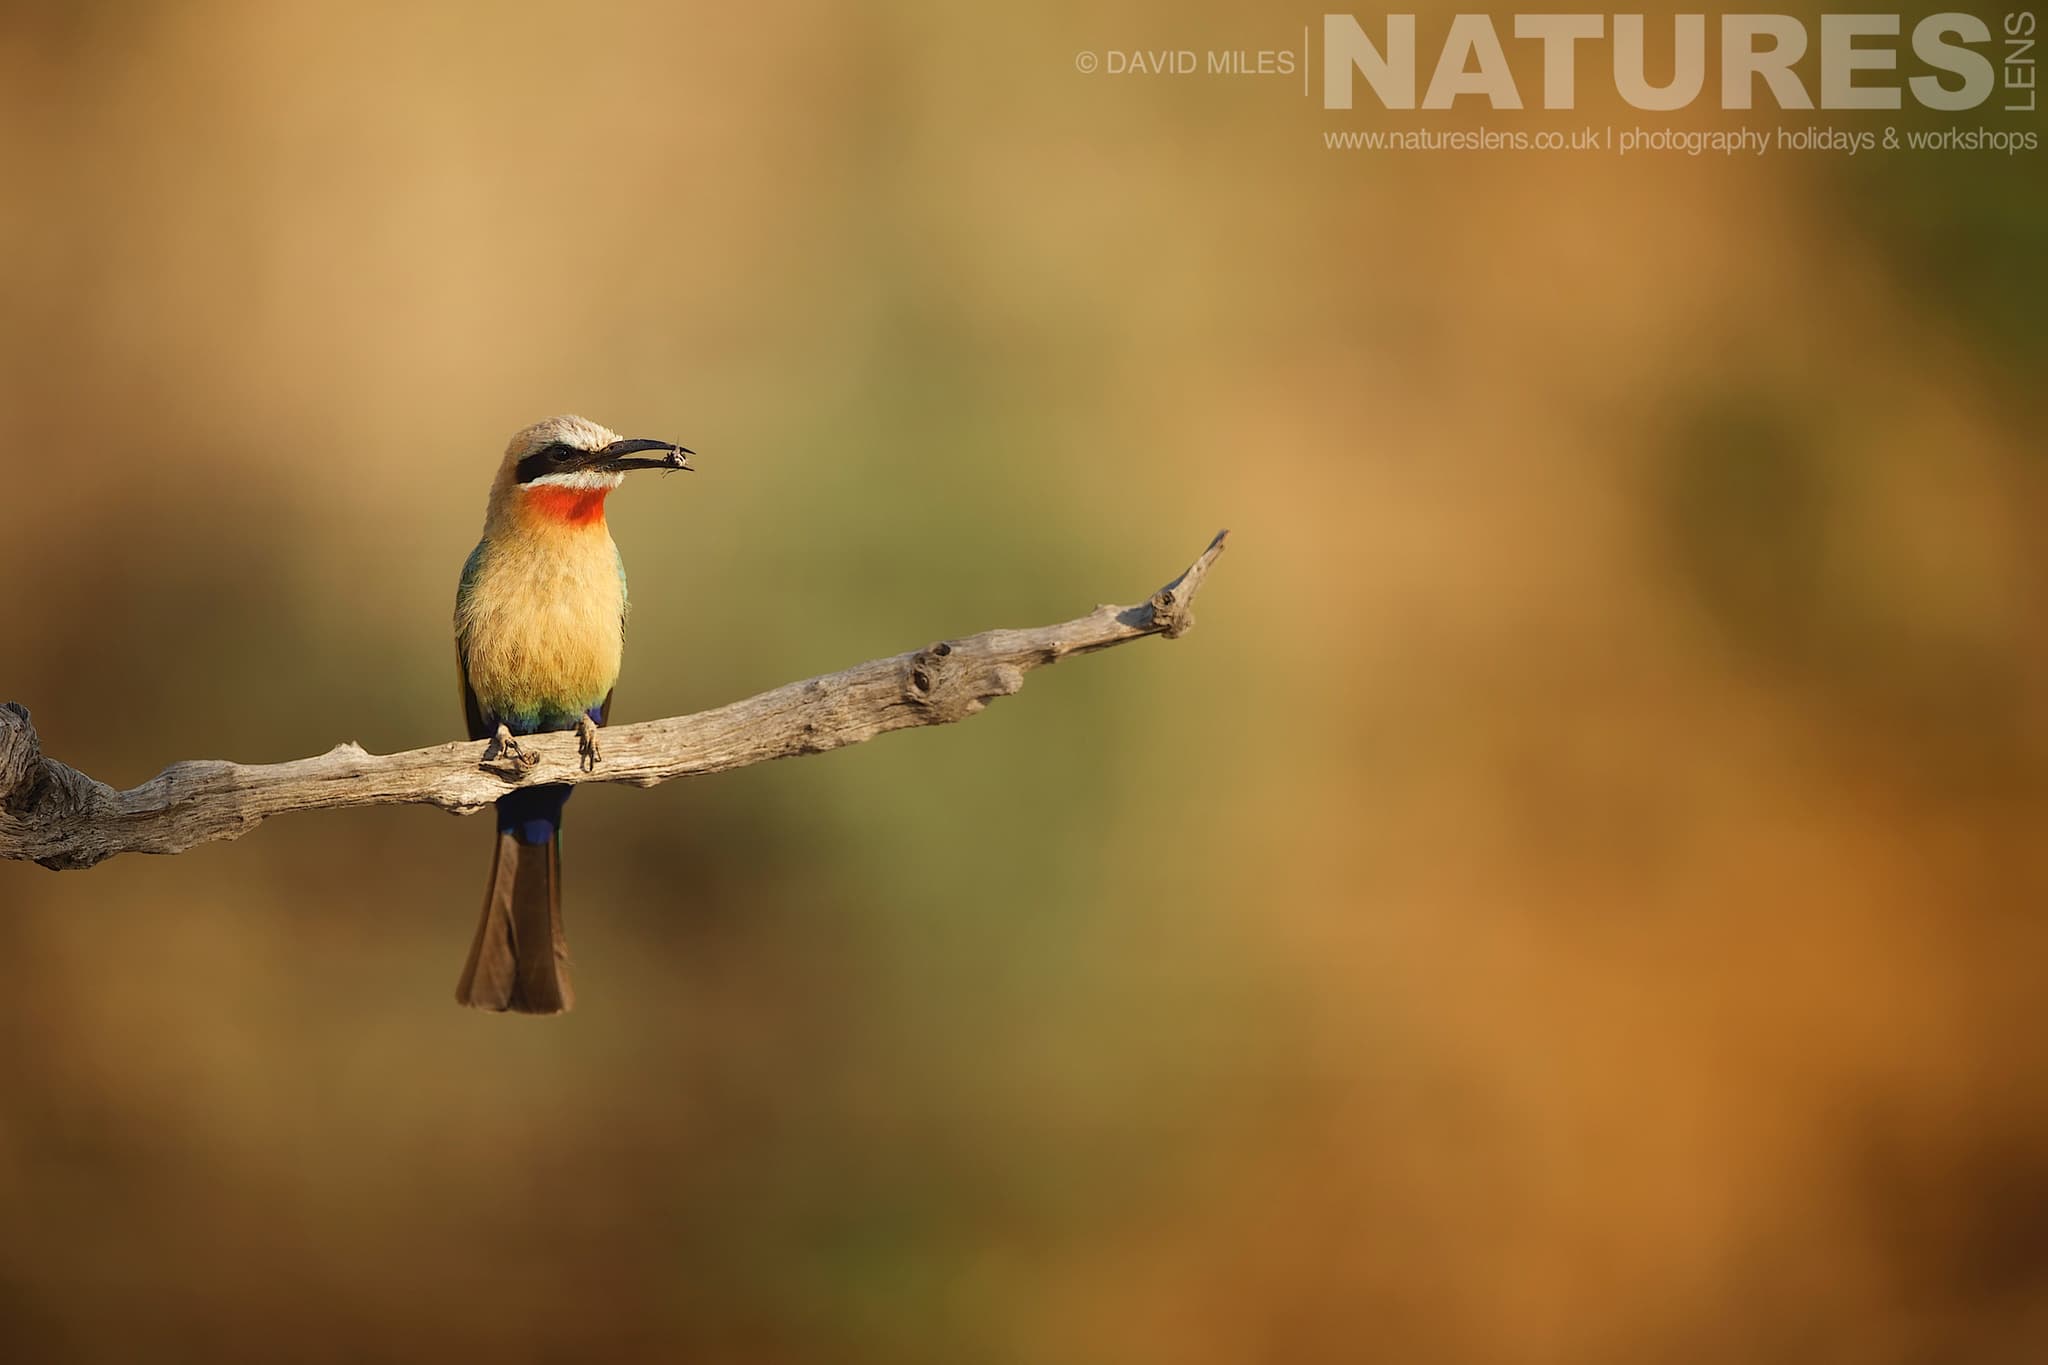 A Perched Bee Eater At One Of The Mobile Hides During Late Afternoon One Of The Species That Makes Up The Awe Inspiring Wildlife Of Zimanga